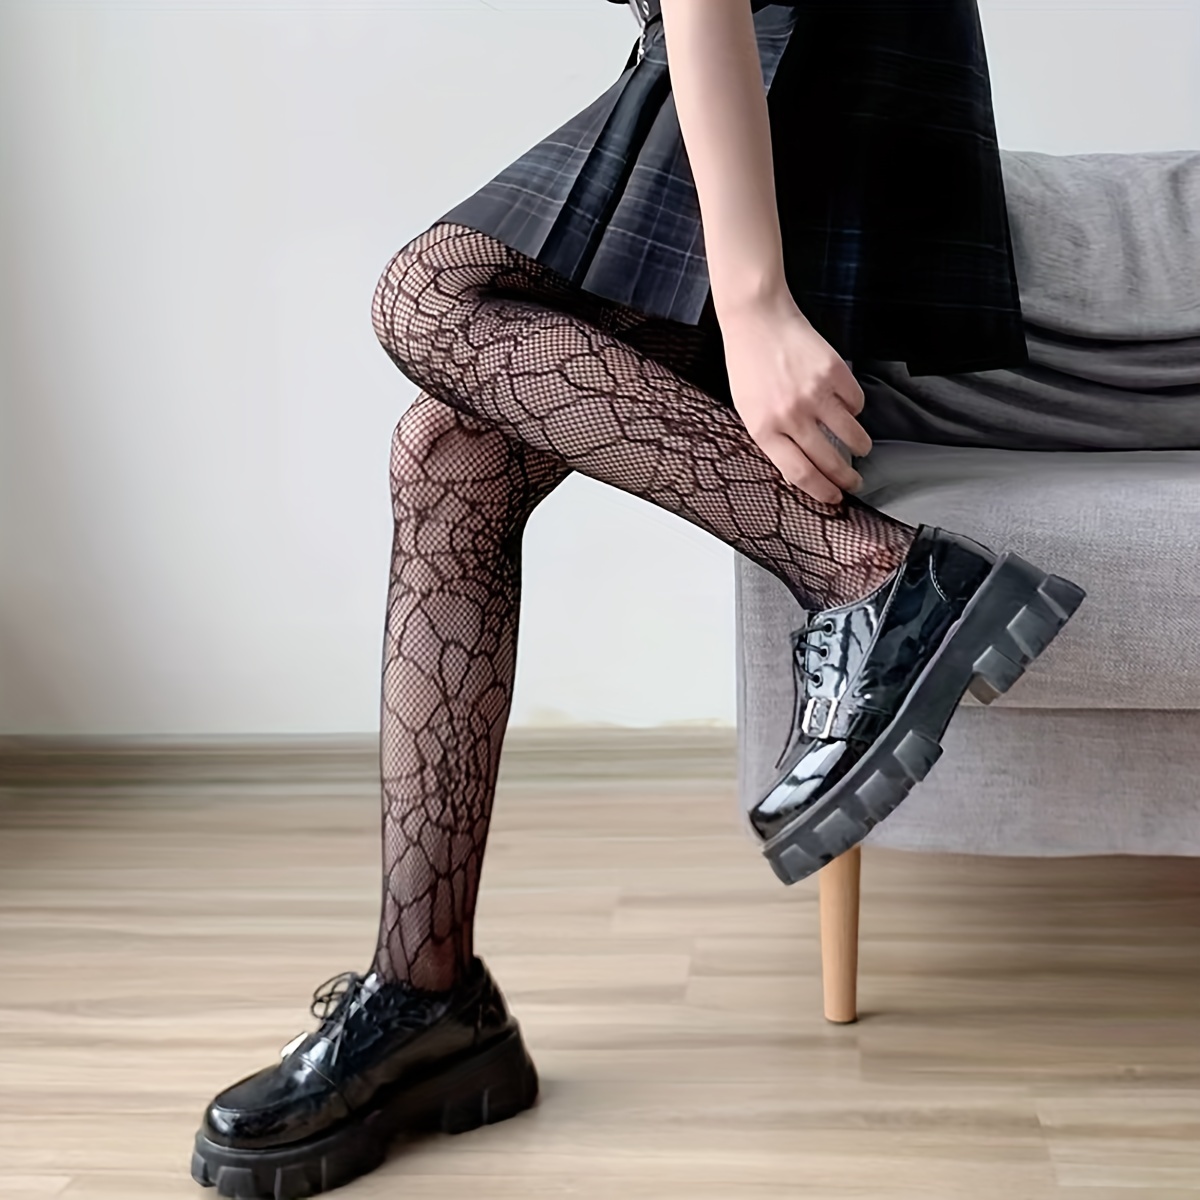 Spiderweb Tights High Waist Spider Web Stockings Fishnet Net Tights Hosiery  Black Sexy Stockings Patterned Pantyhose For Women